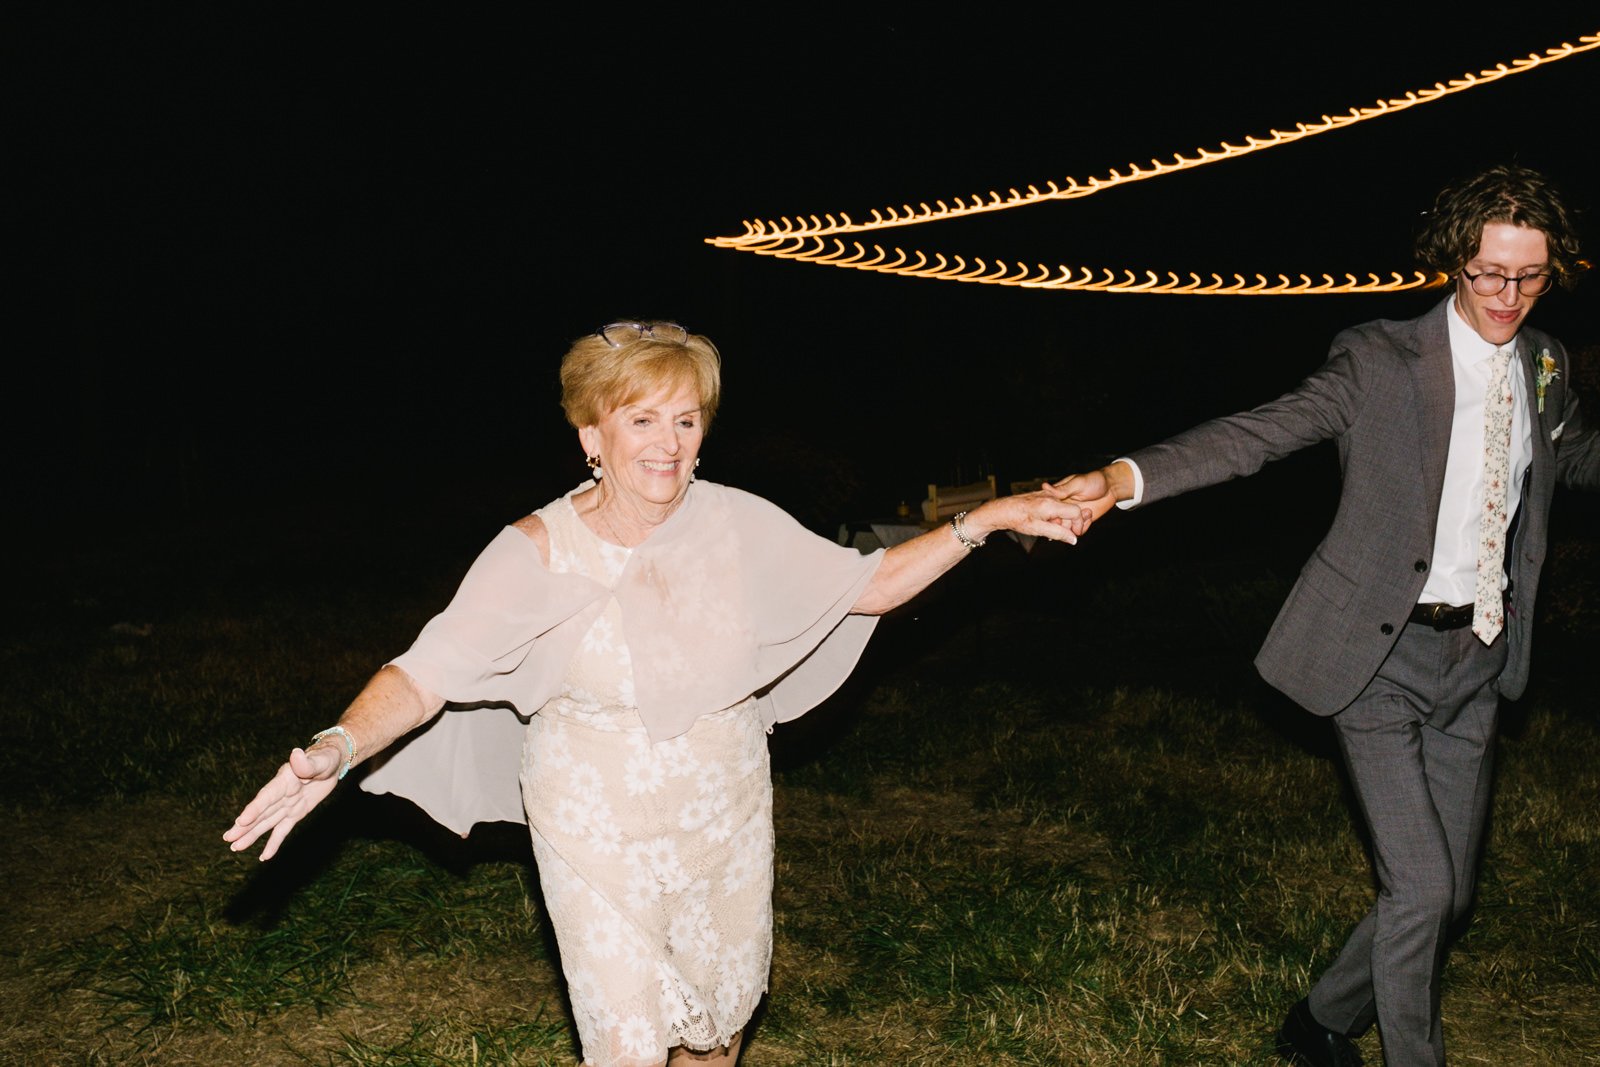  Groom holds hand of grandmother during reception dancing 